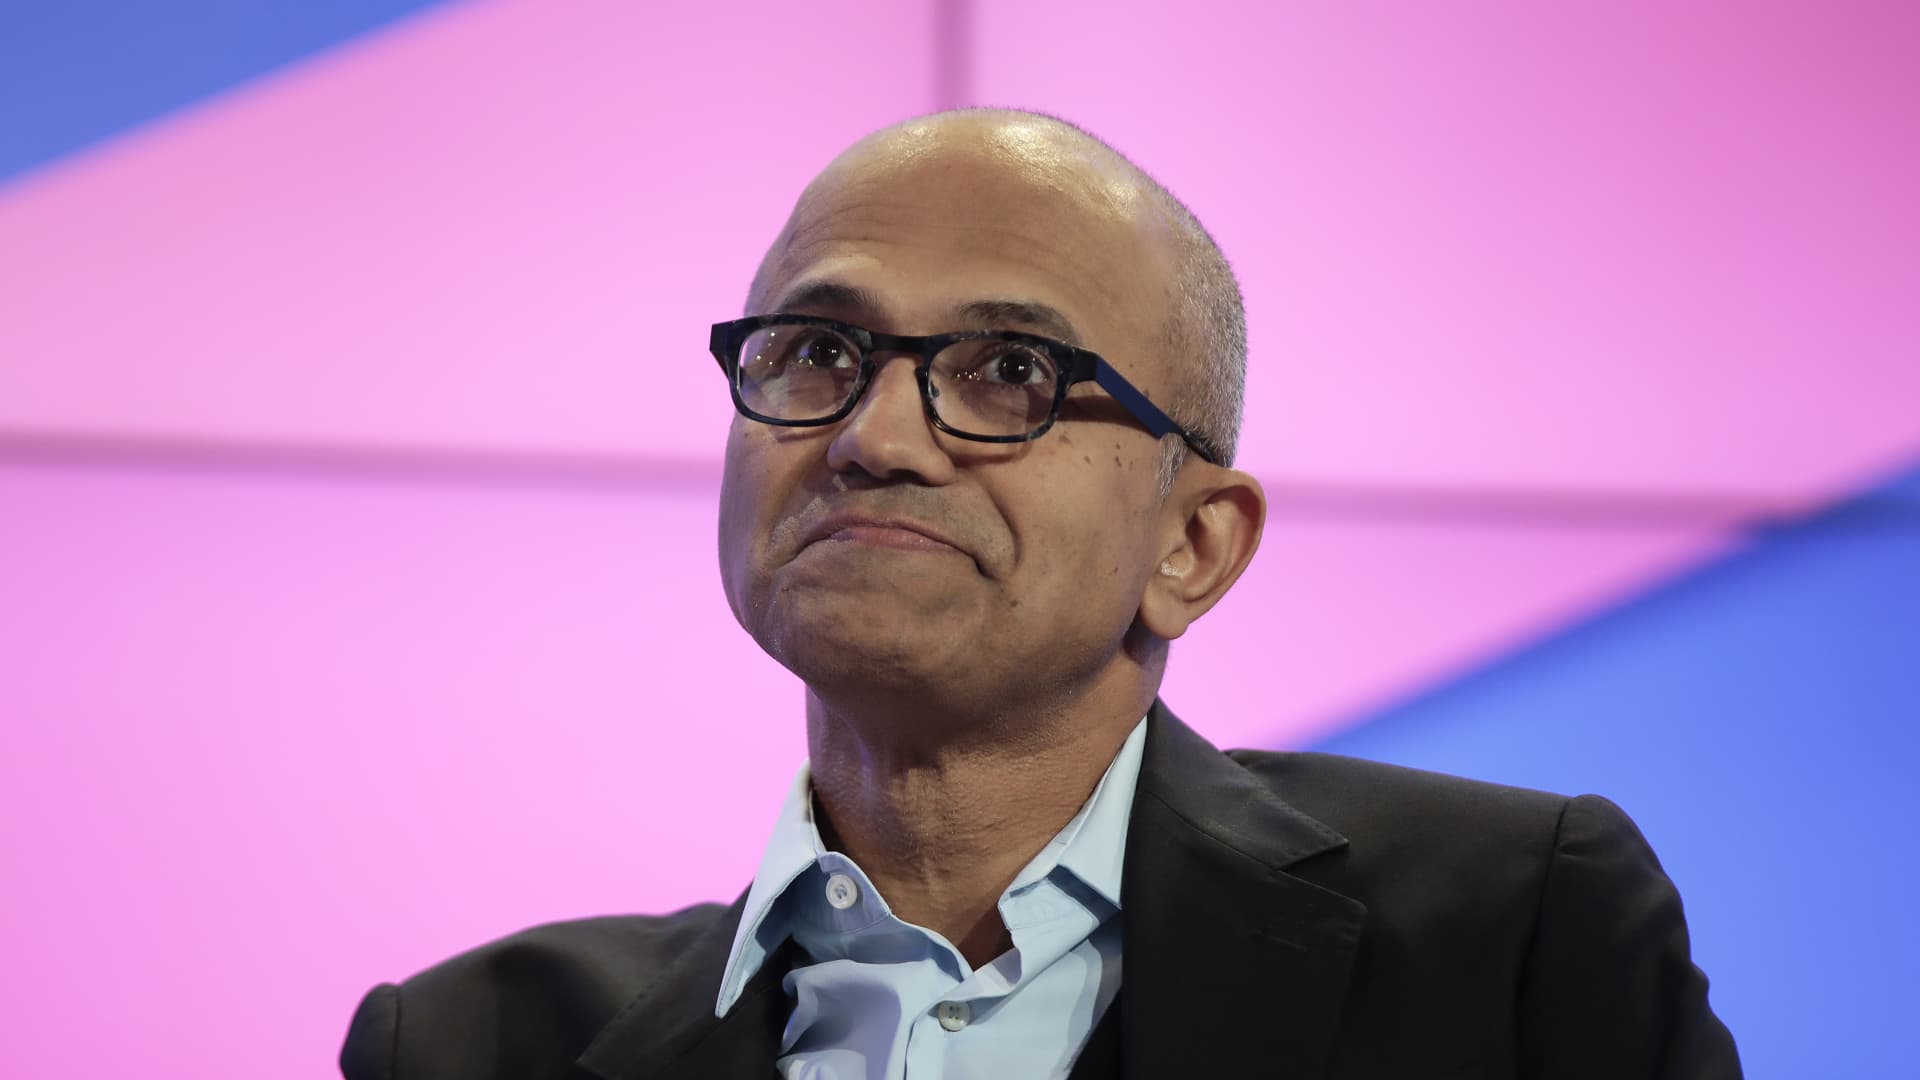 Microsoft CEO Nadella talks concerns around A.I. and its impact on jobs, education